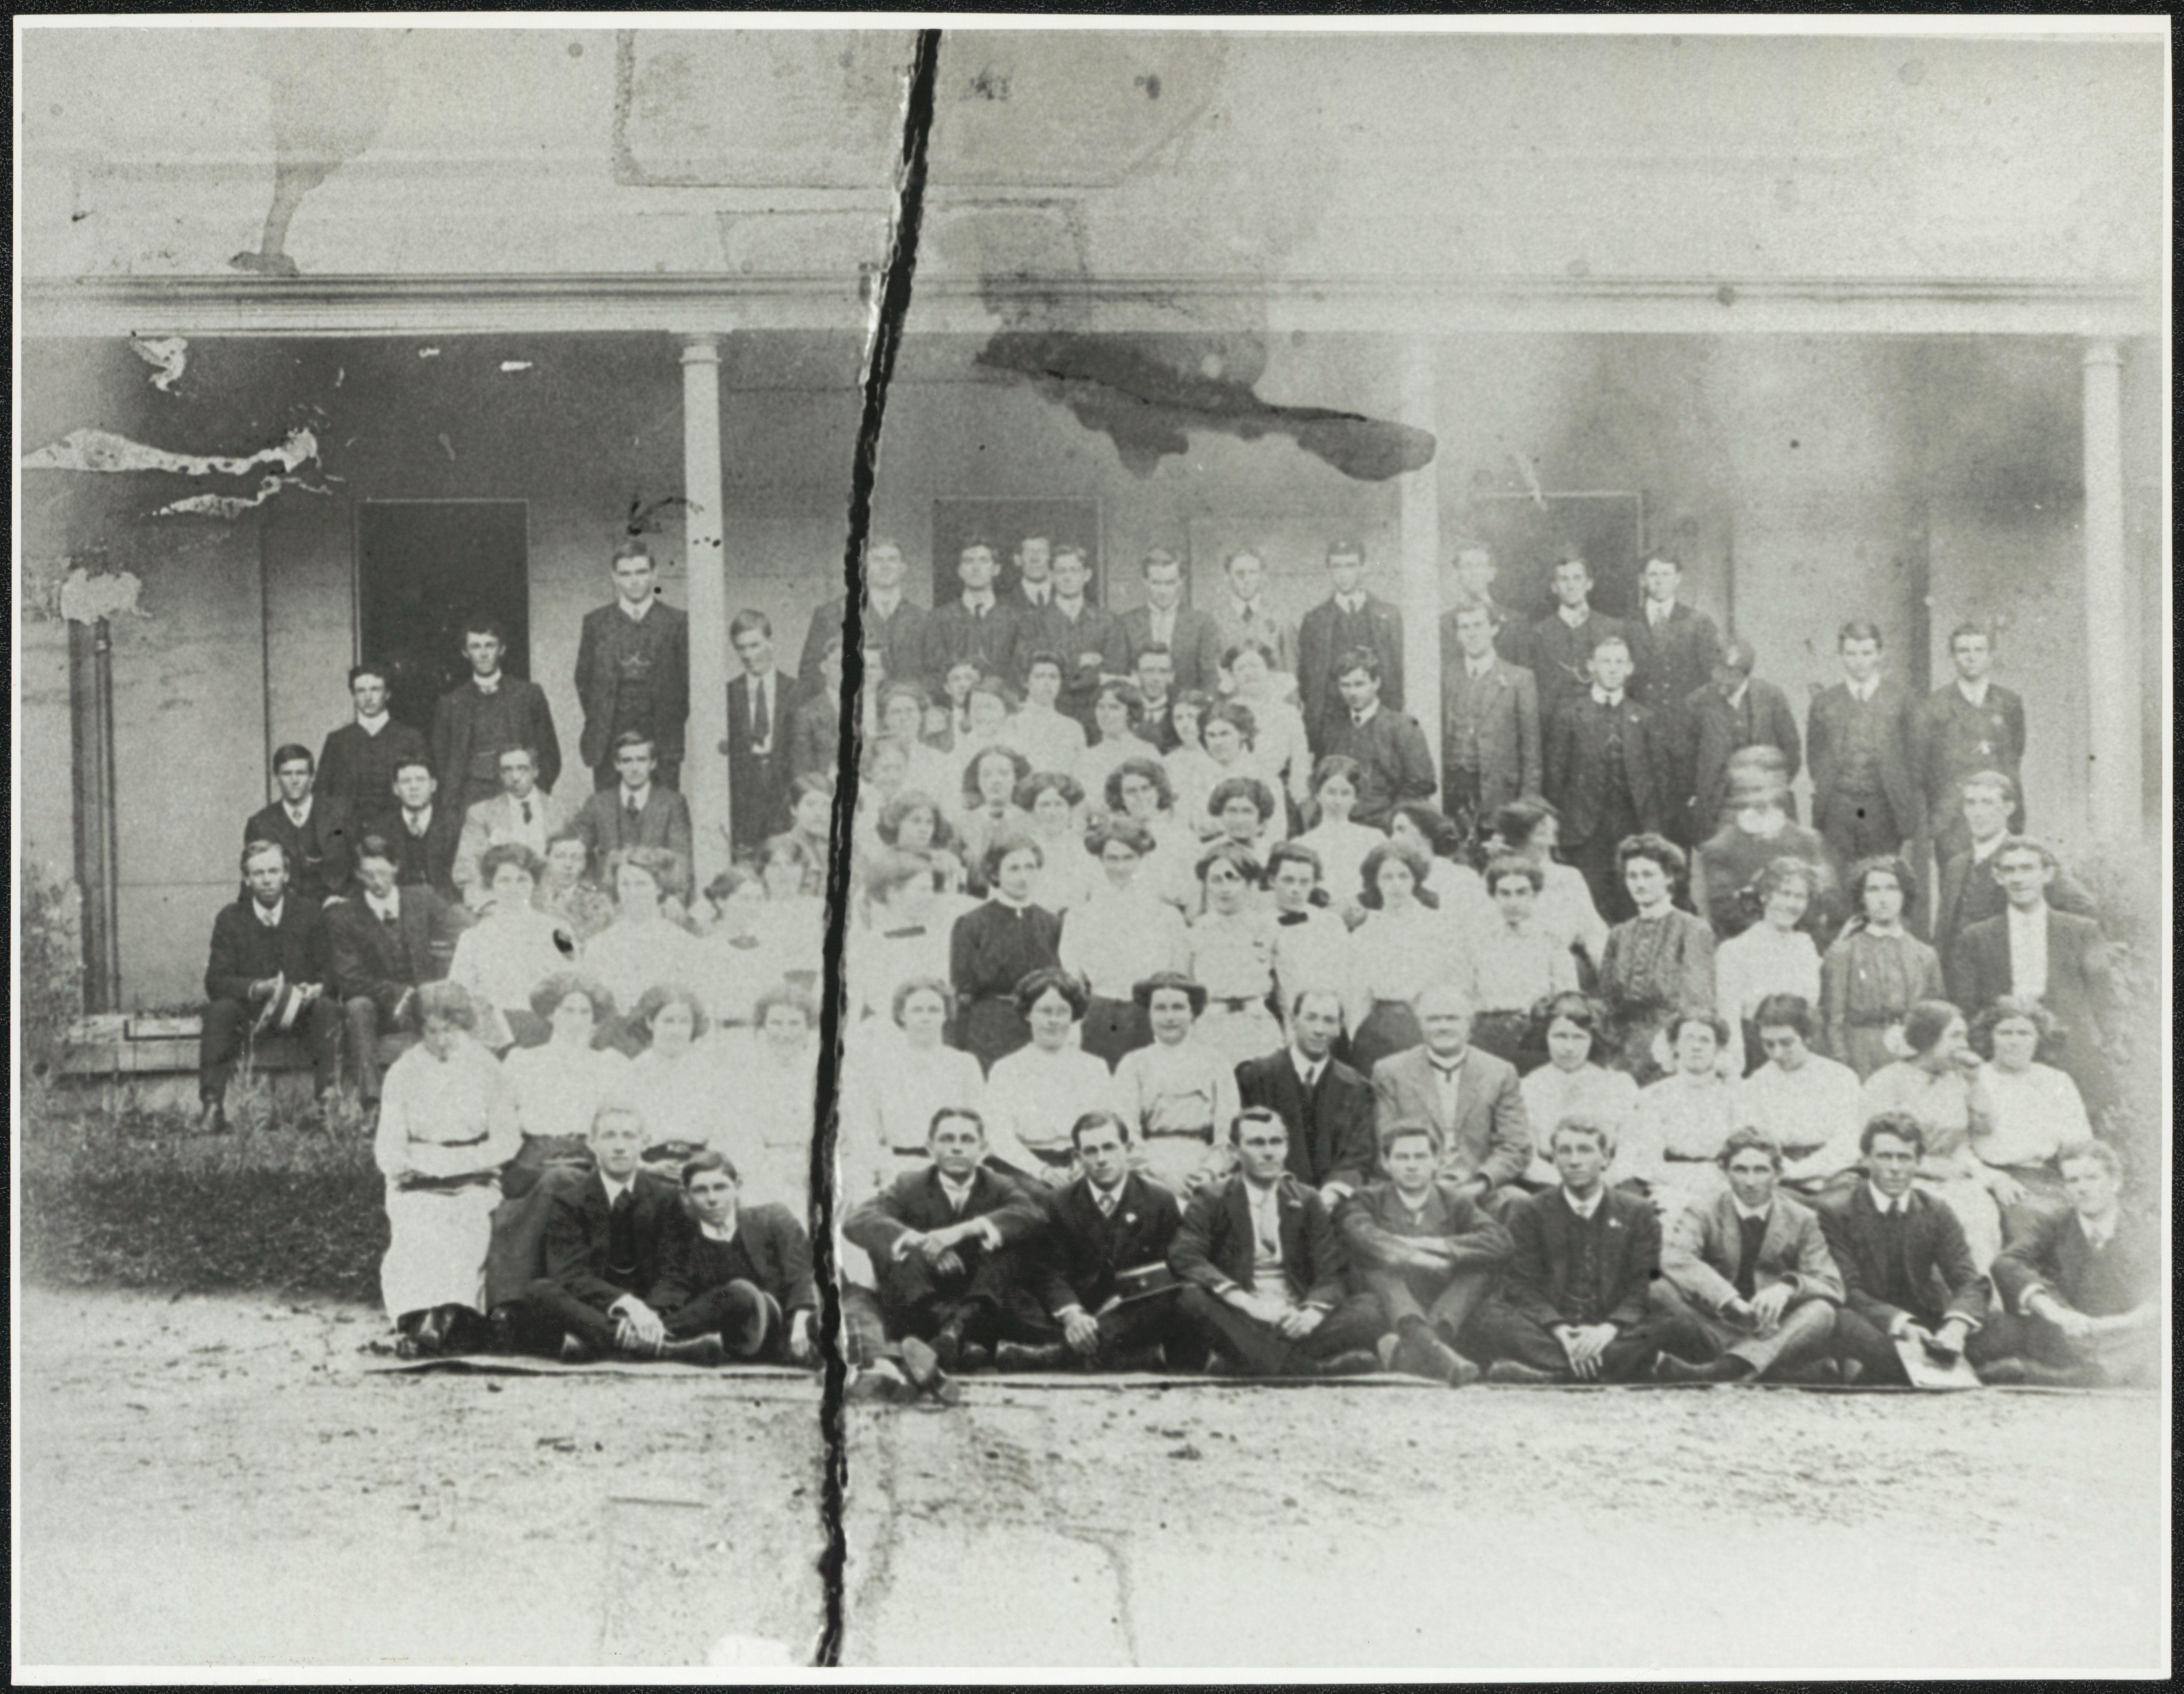 A group of teachers in training pose for a photo